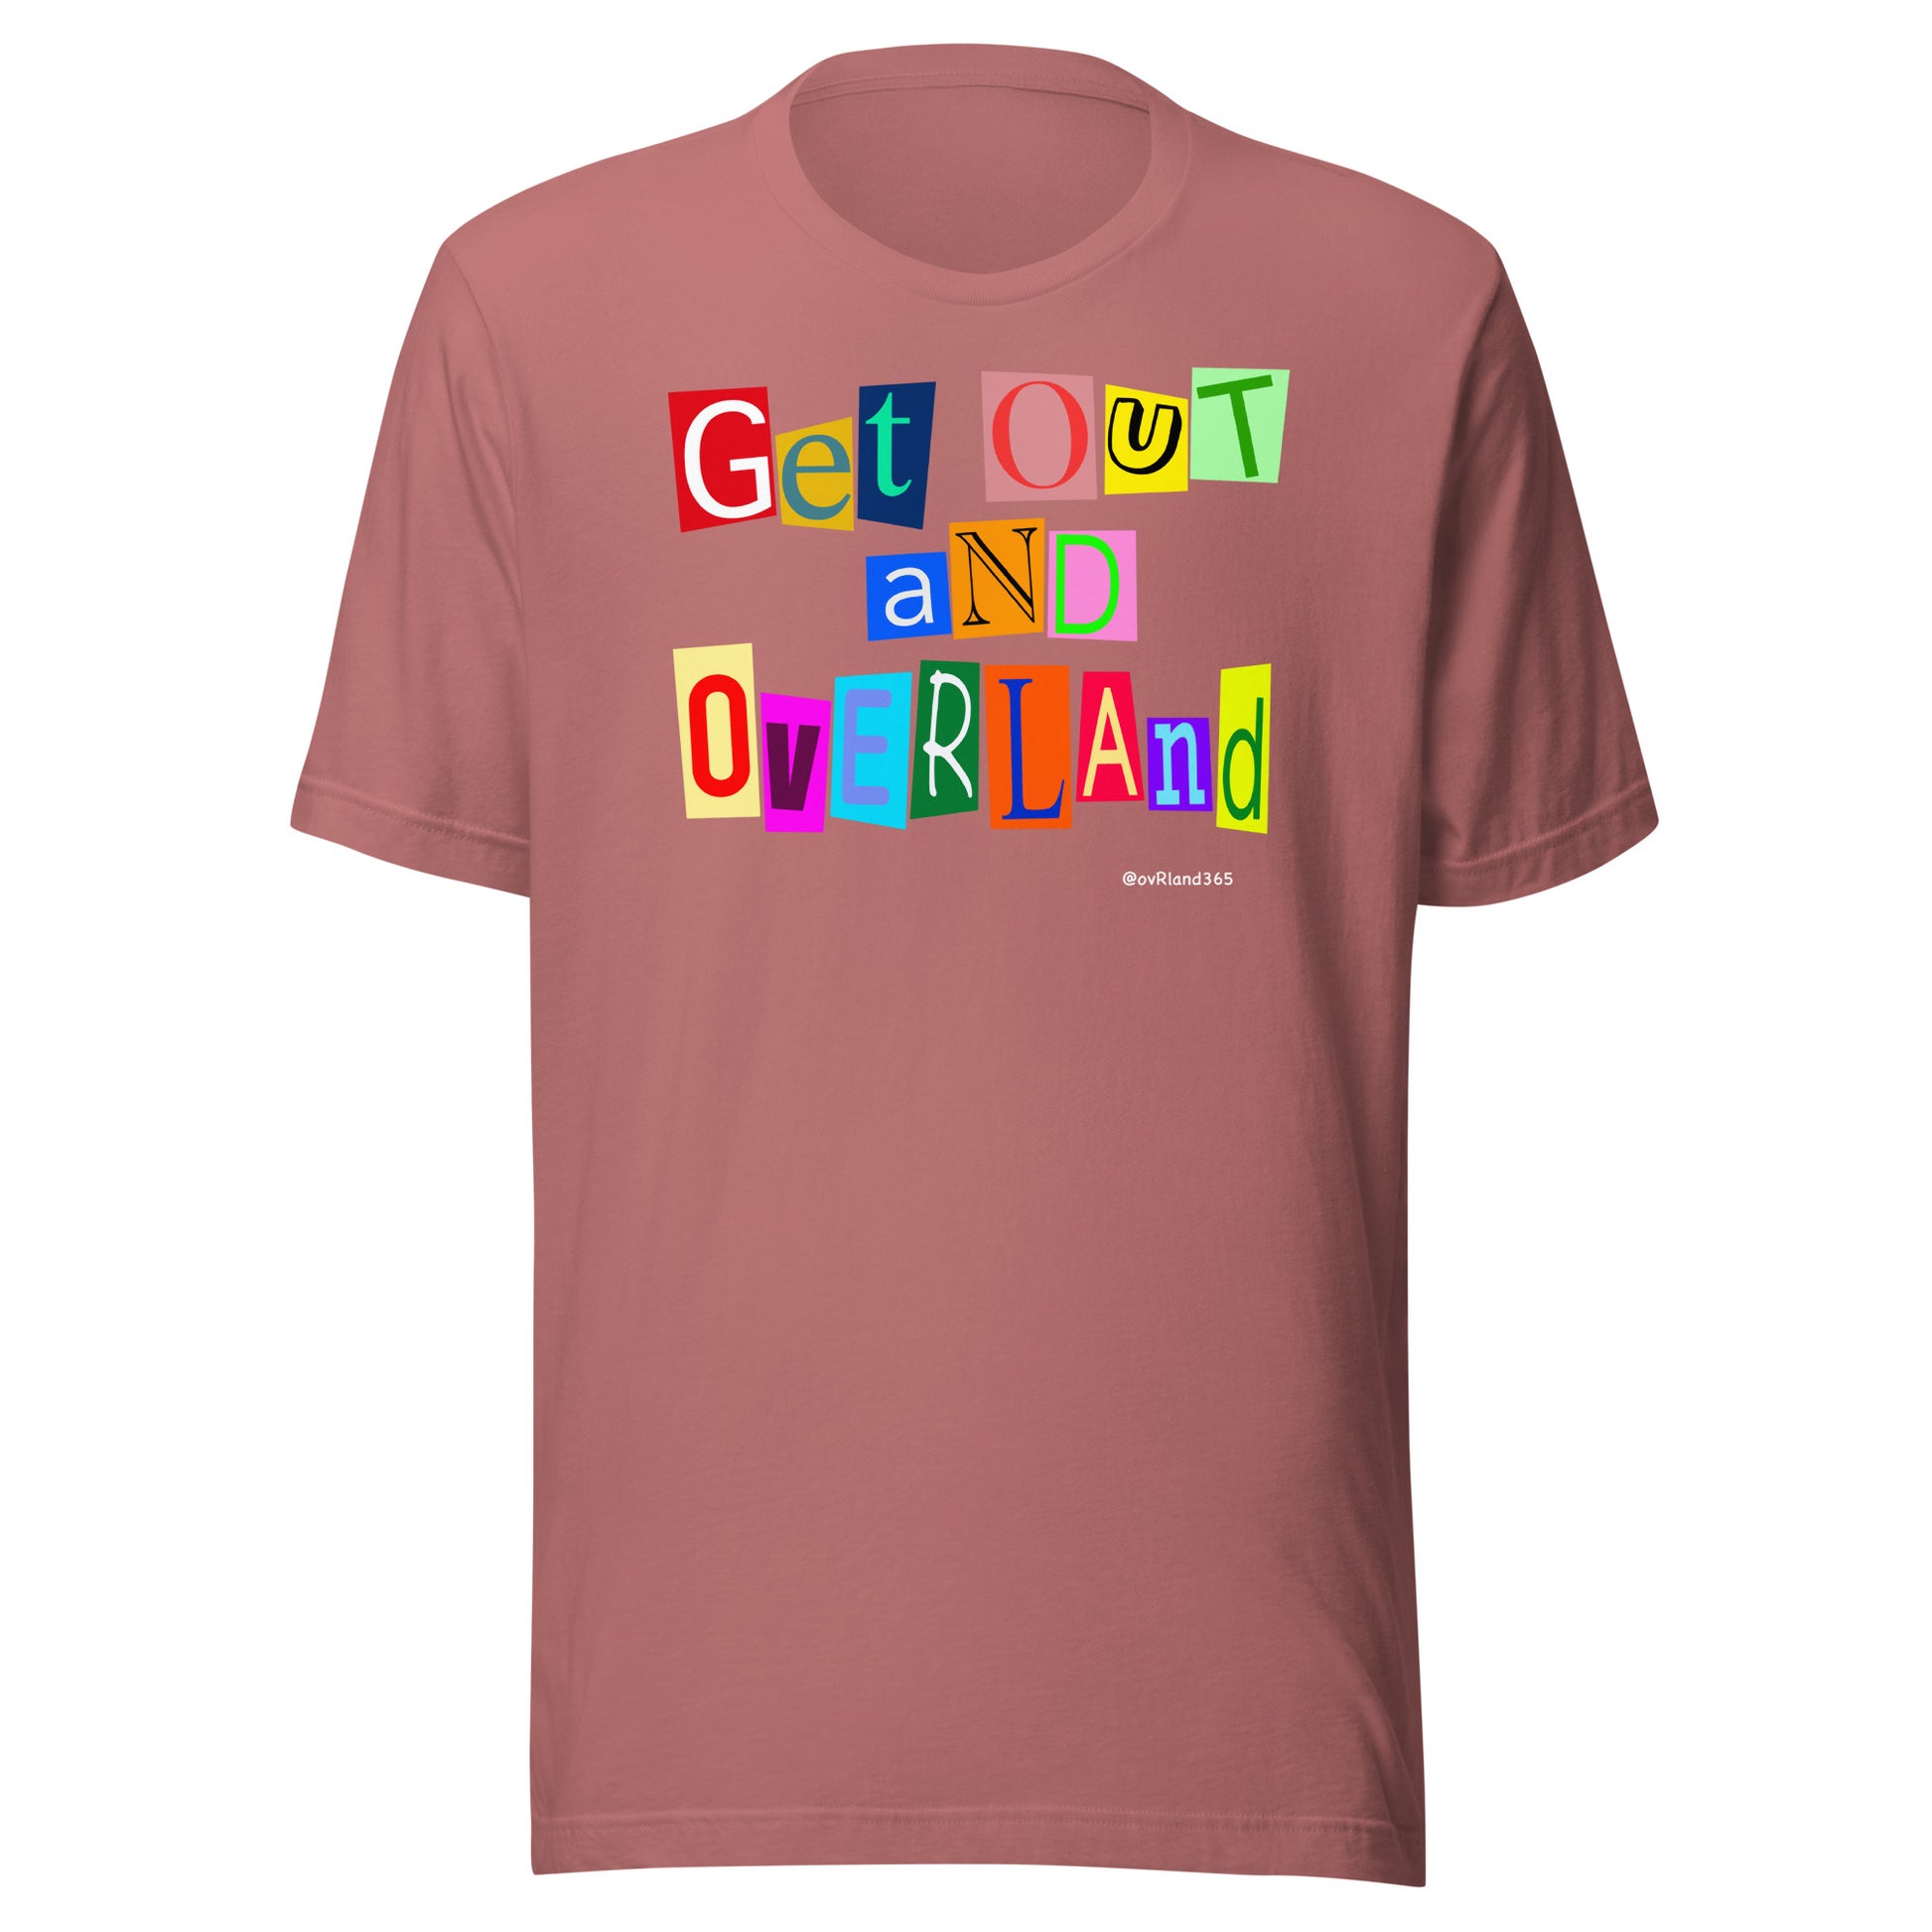 Pink t-shirt "Get OuT aND OvERLand". overland365.com